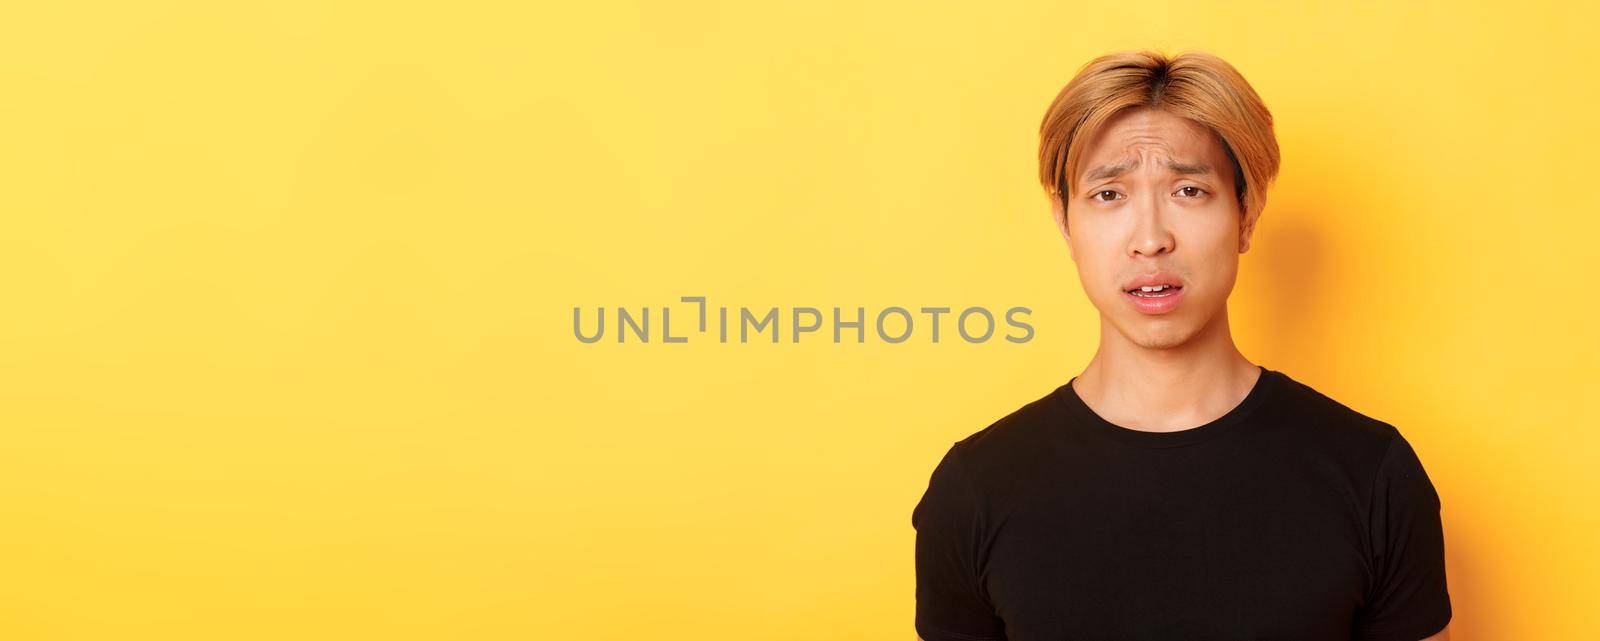 Close-up of confused and upset asian blond guy looking puzzled, open mouth and frowning perplexed, standing over yellow background.